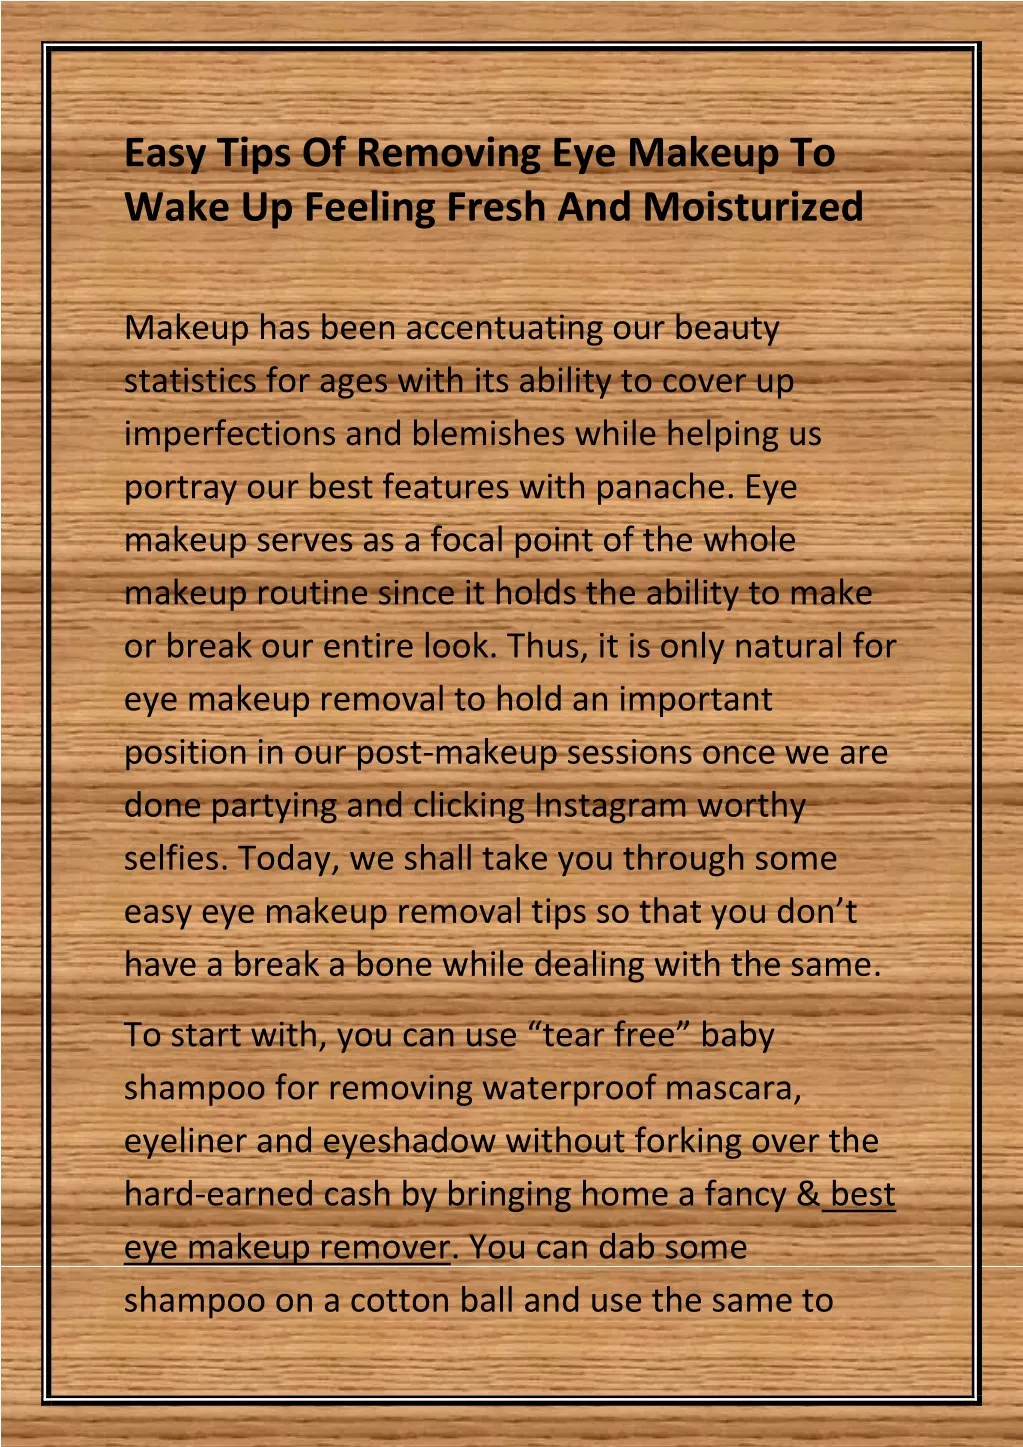 easy tips of removing eye makeup to wake